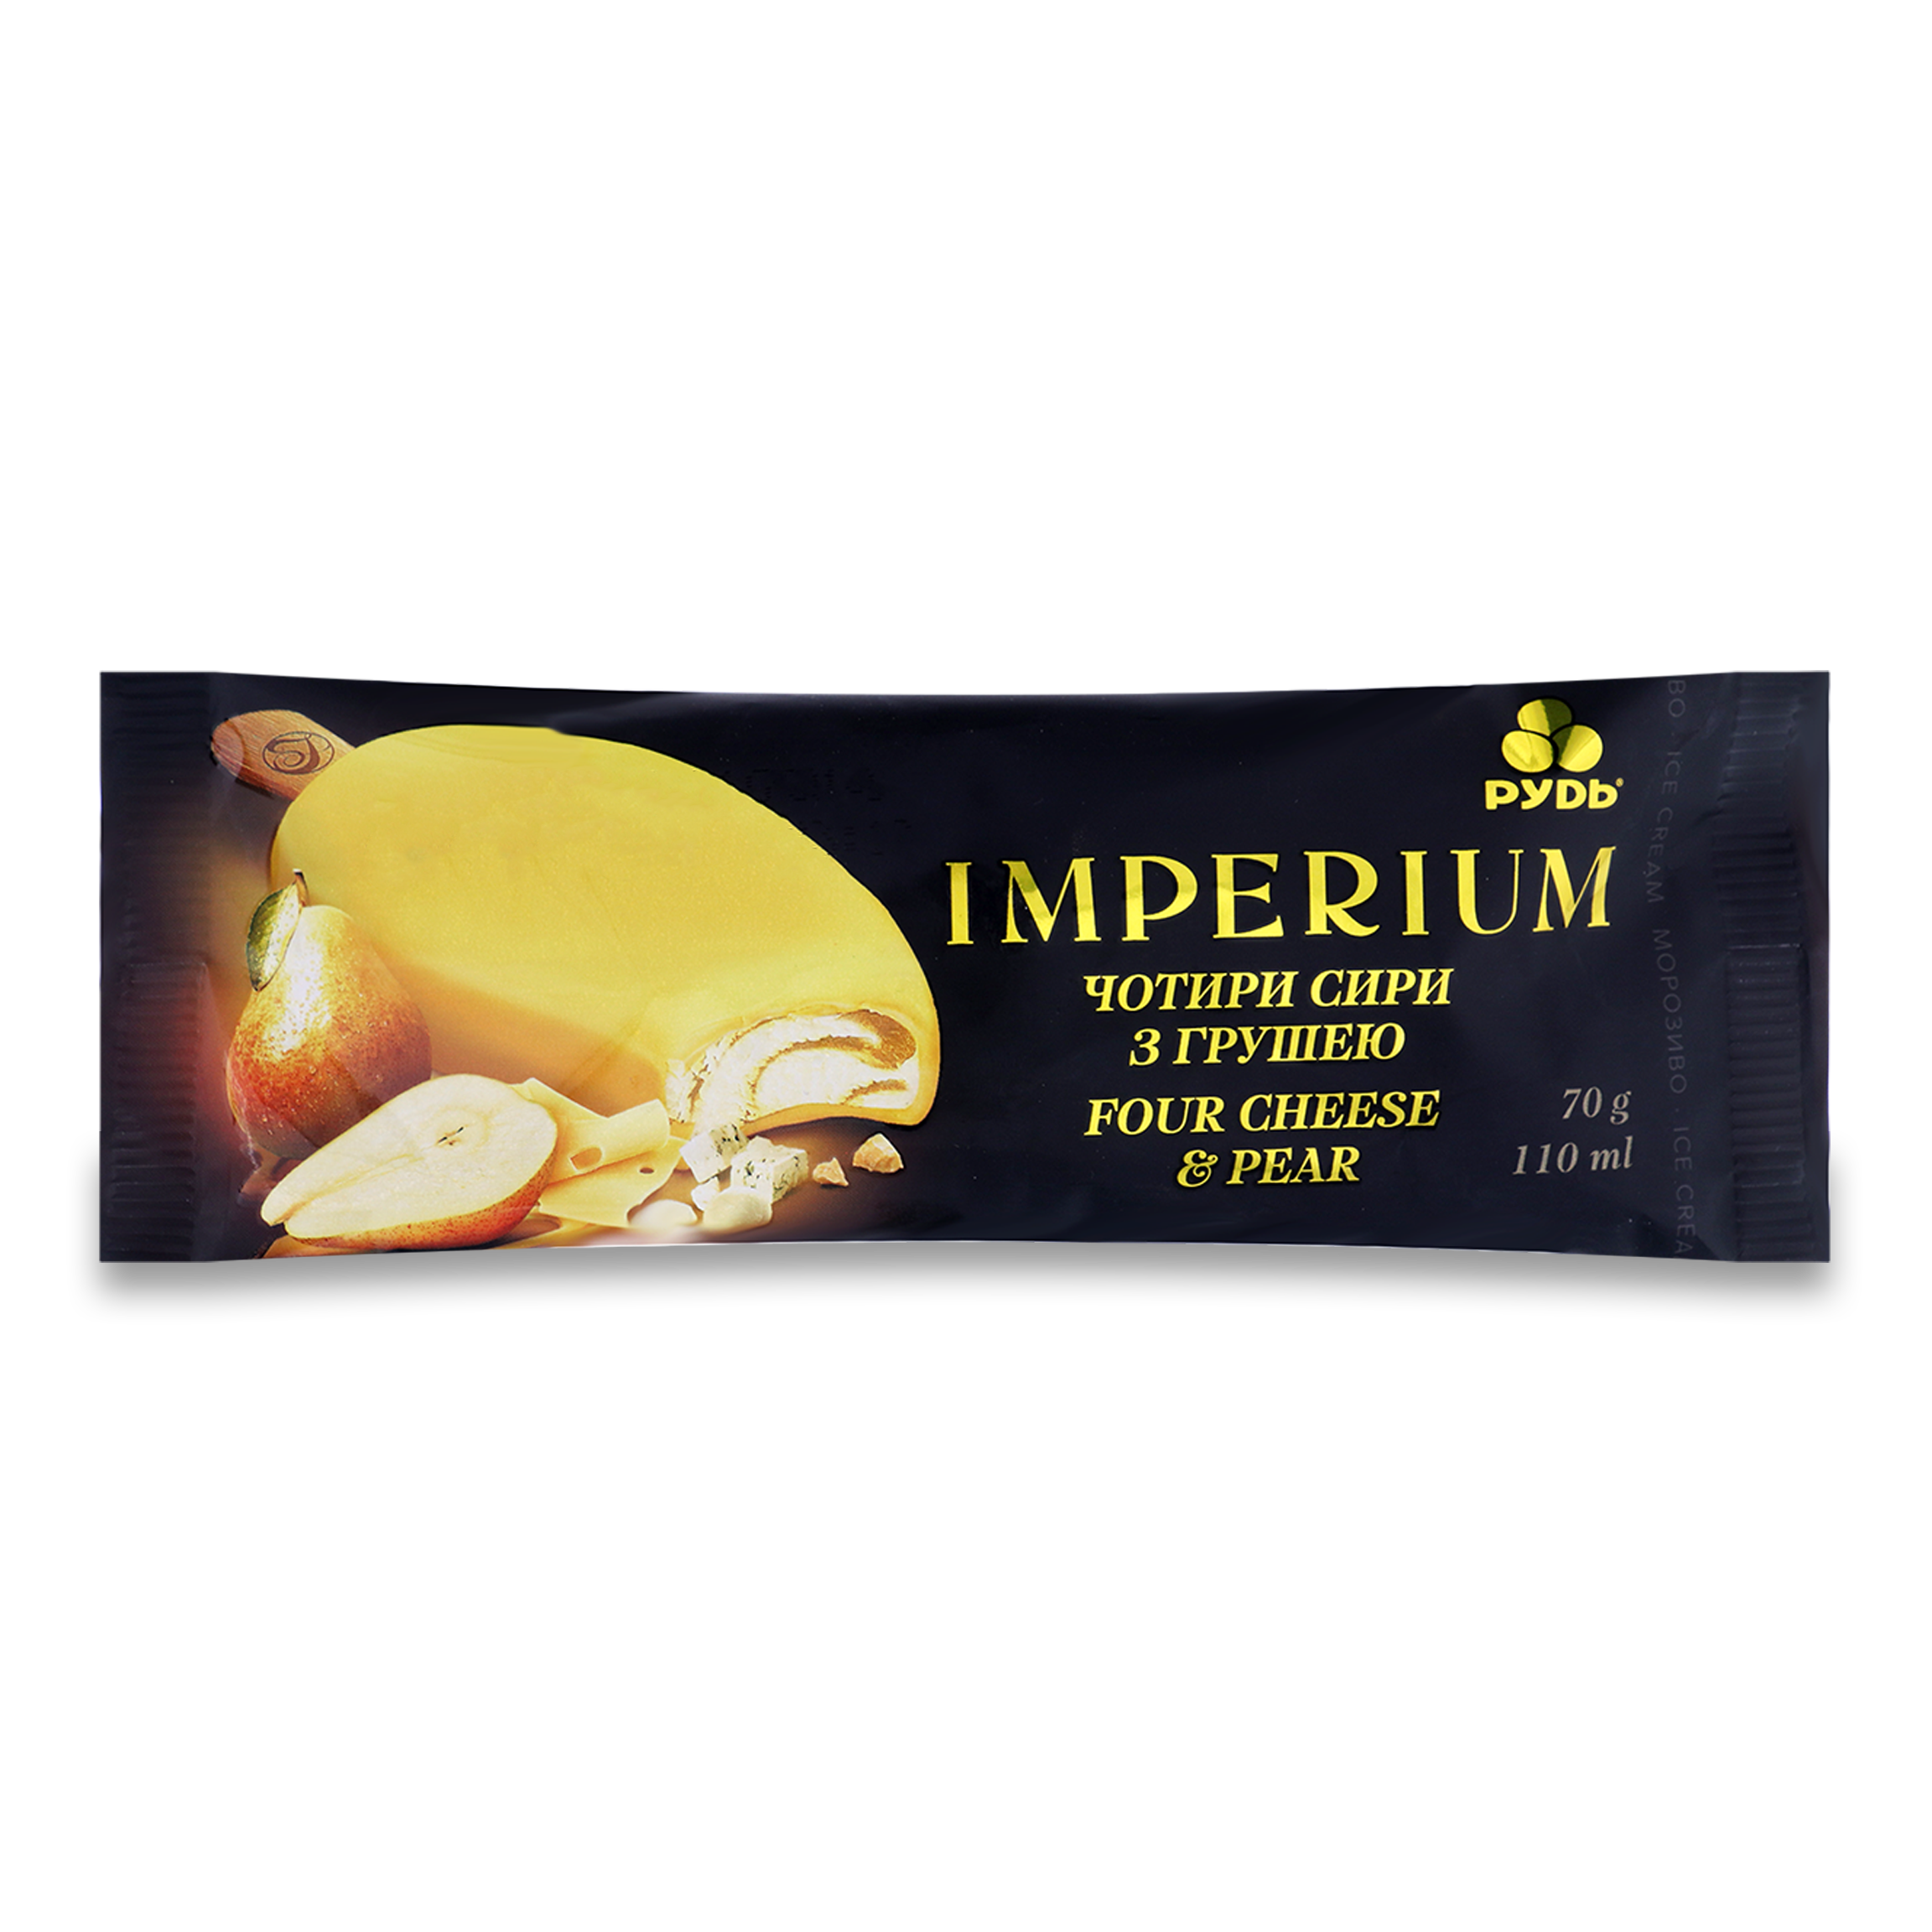 Rud' Imperium Four Cheese and Pear Popsicle Ice Cream 70g